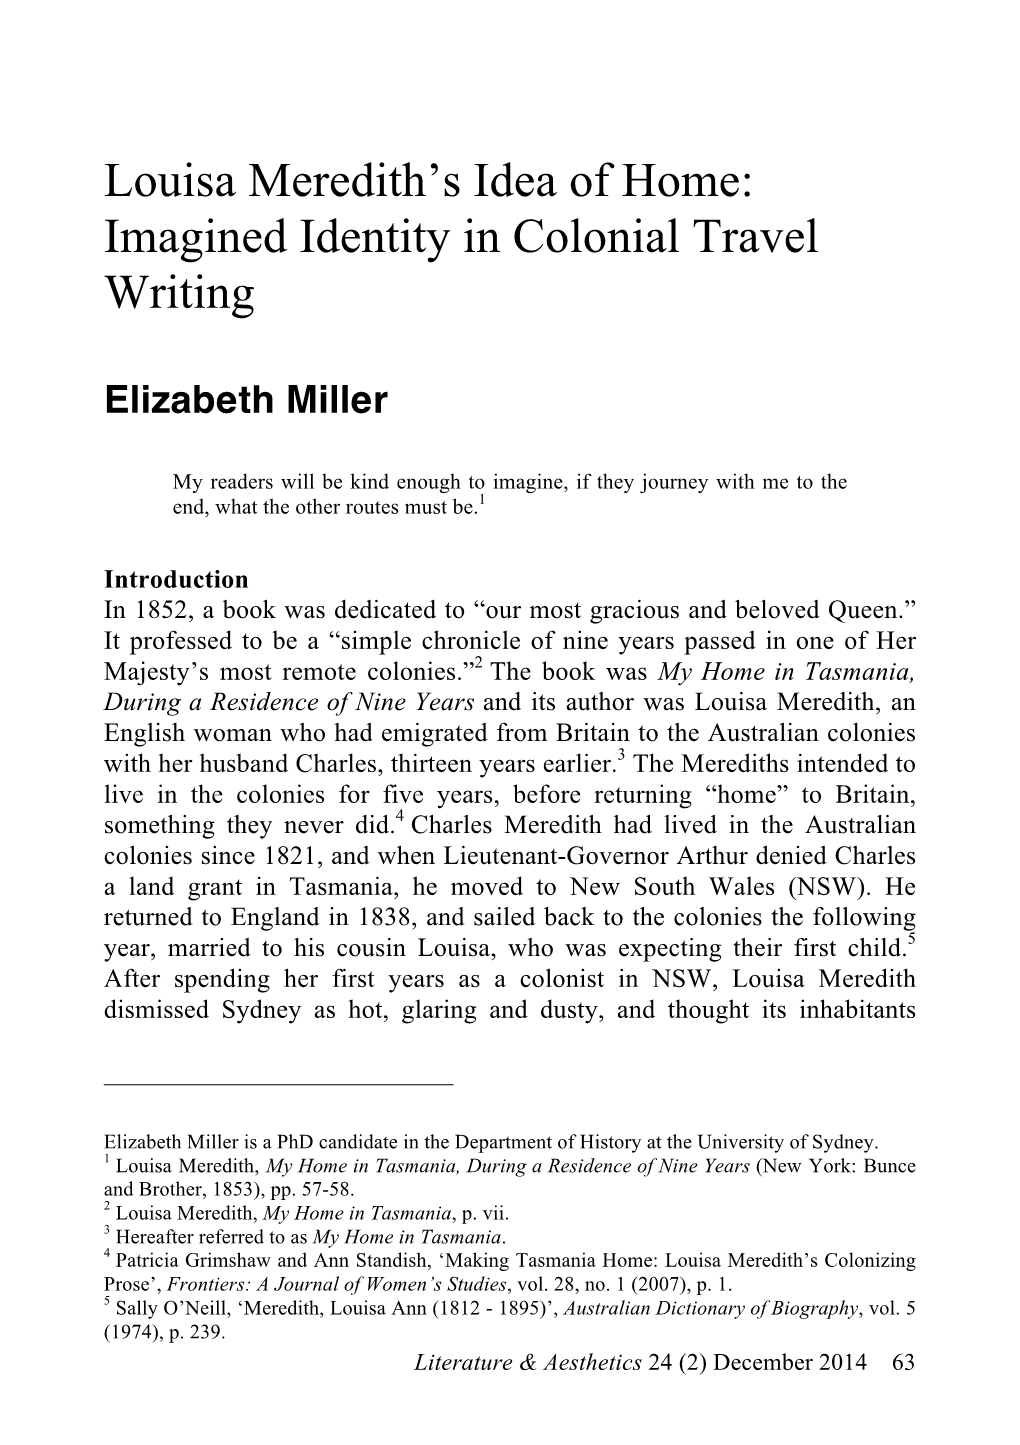 Louisa Meredith's Idea of Home: Imagined Identity in Colonial Travel